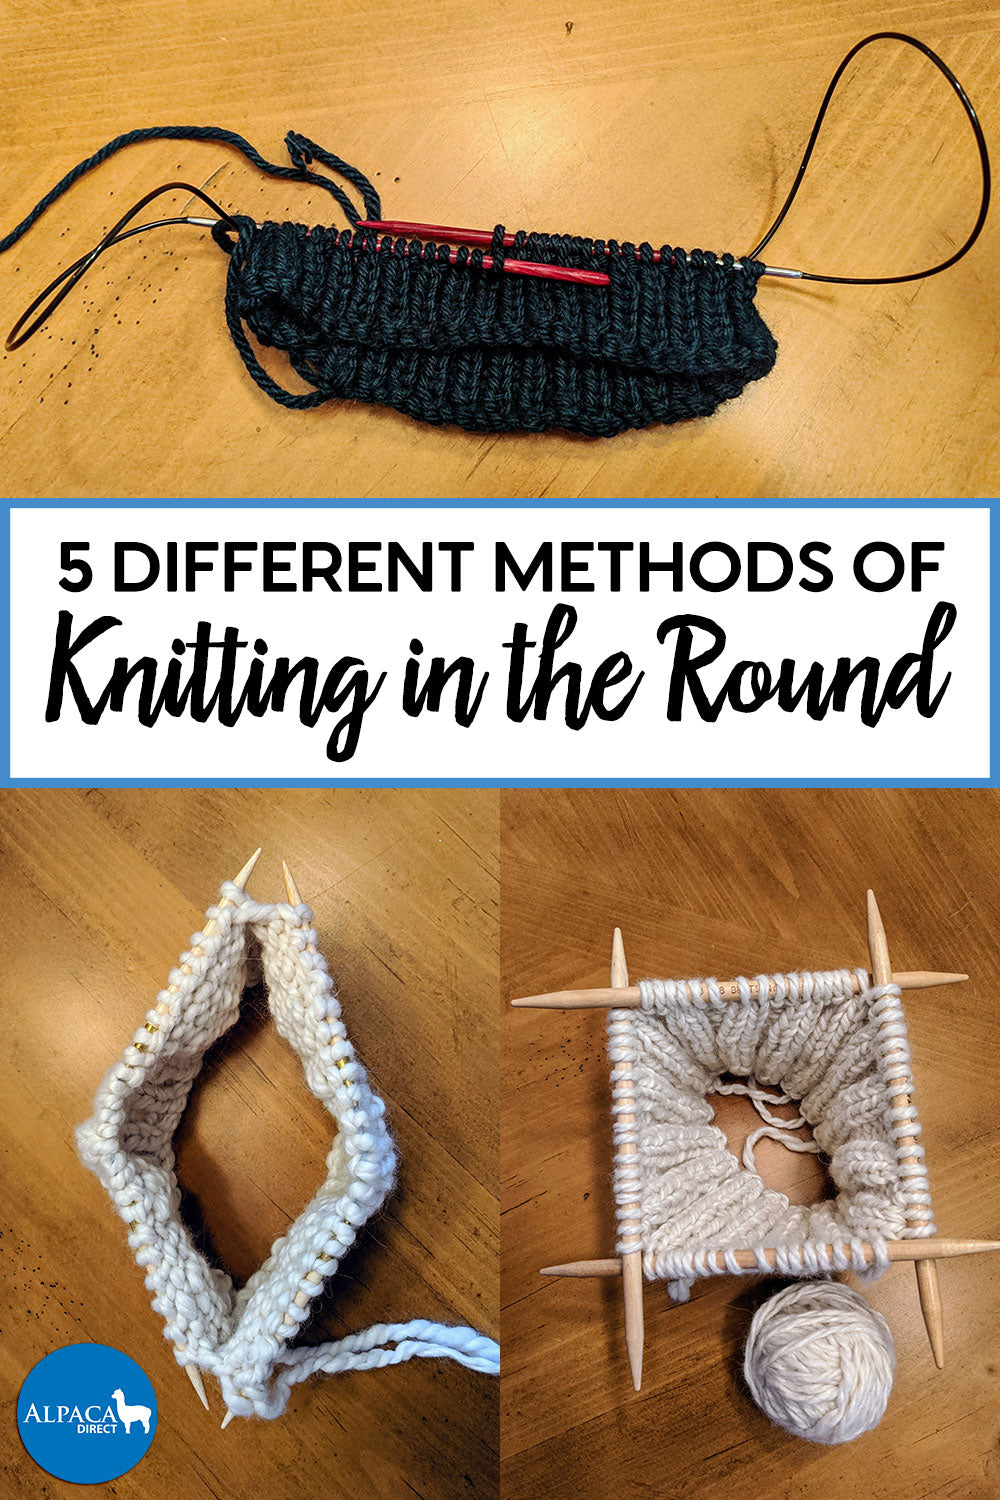 Collage of three photos showing different methods of knitting in the round.